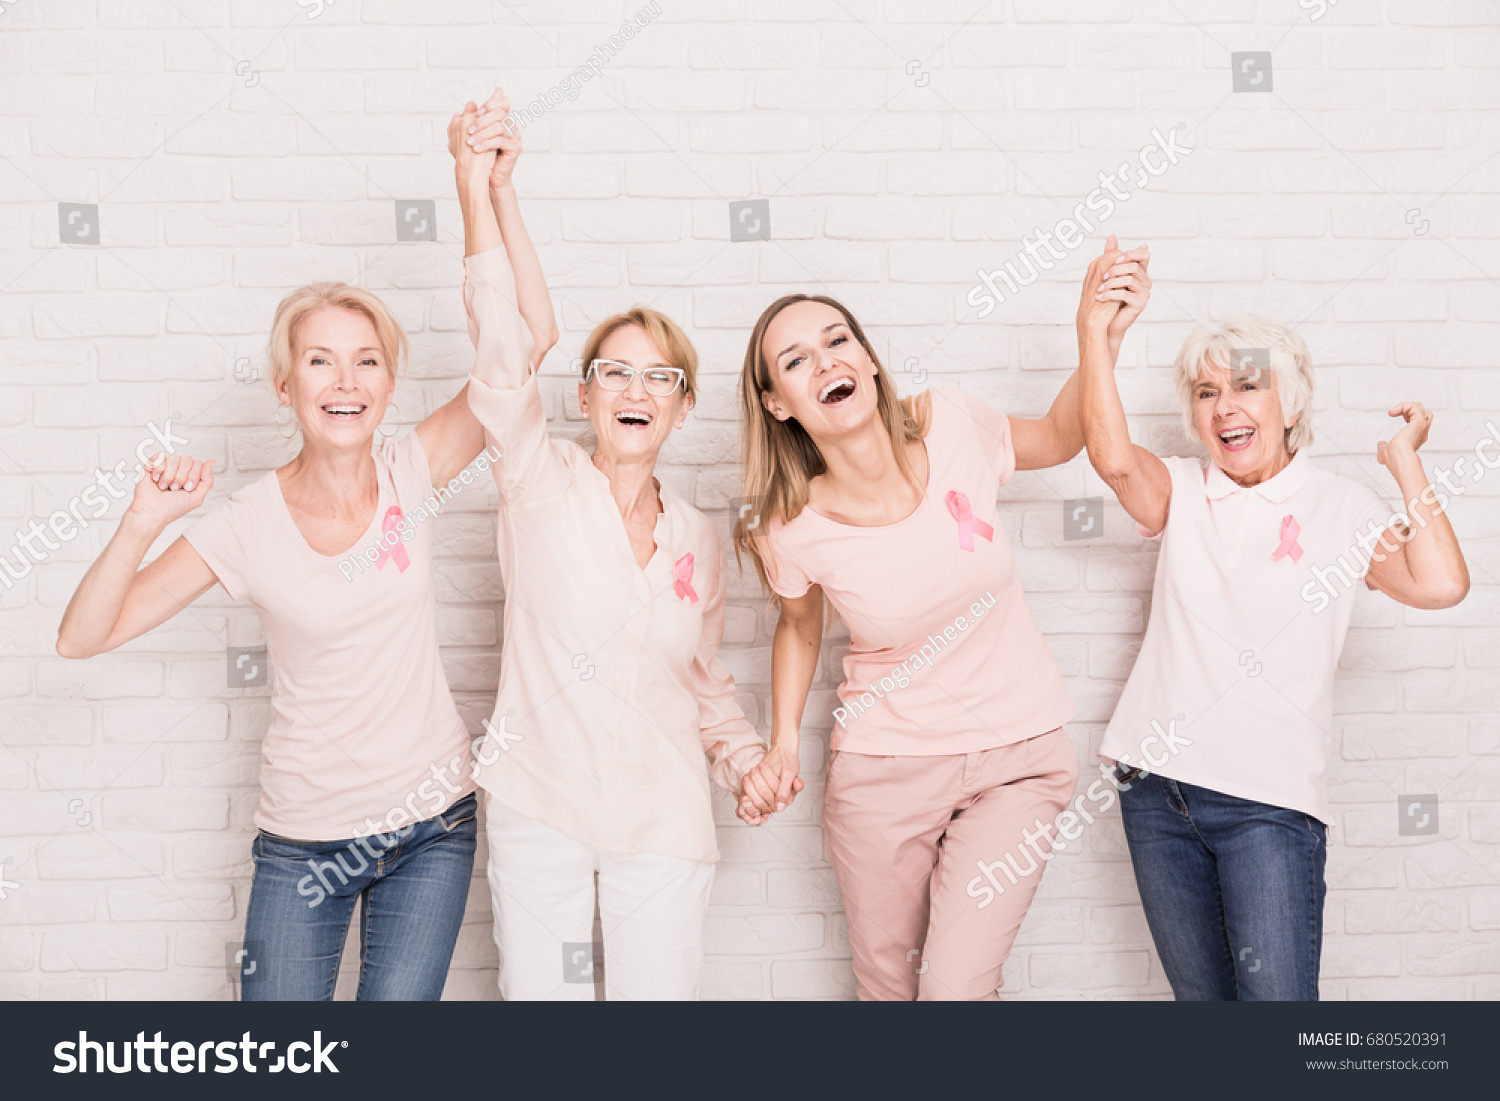 Group of smiling ladies with pink ribbons cheering and holding hands #680520391